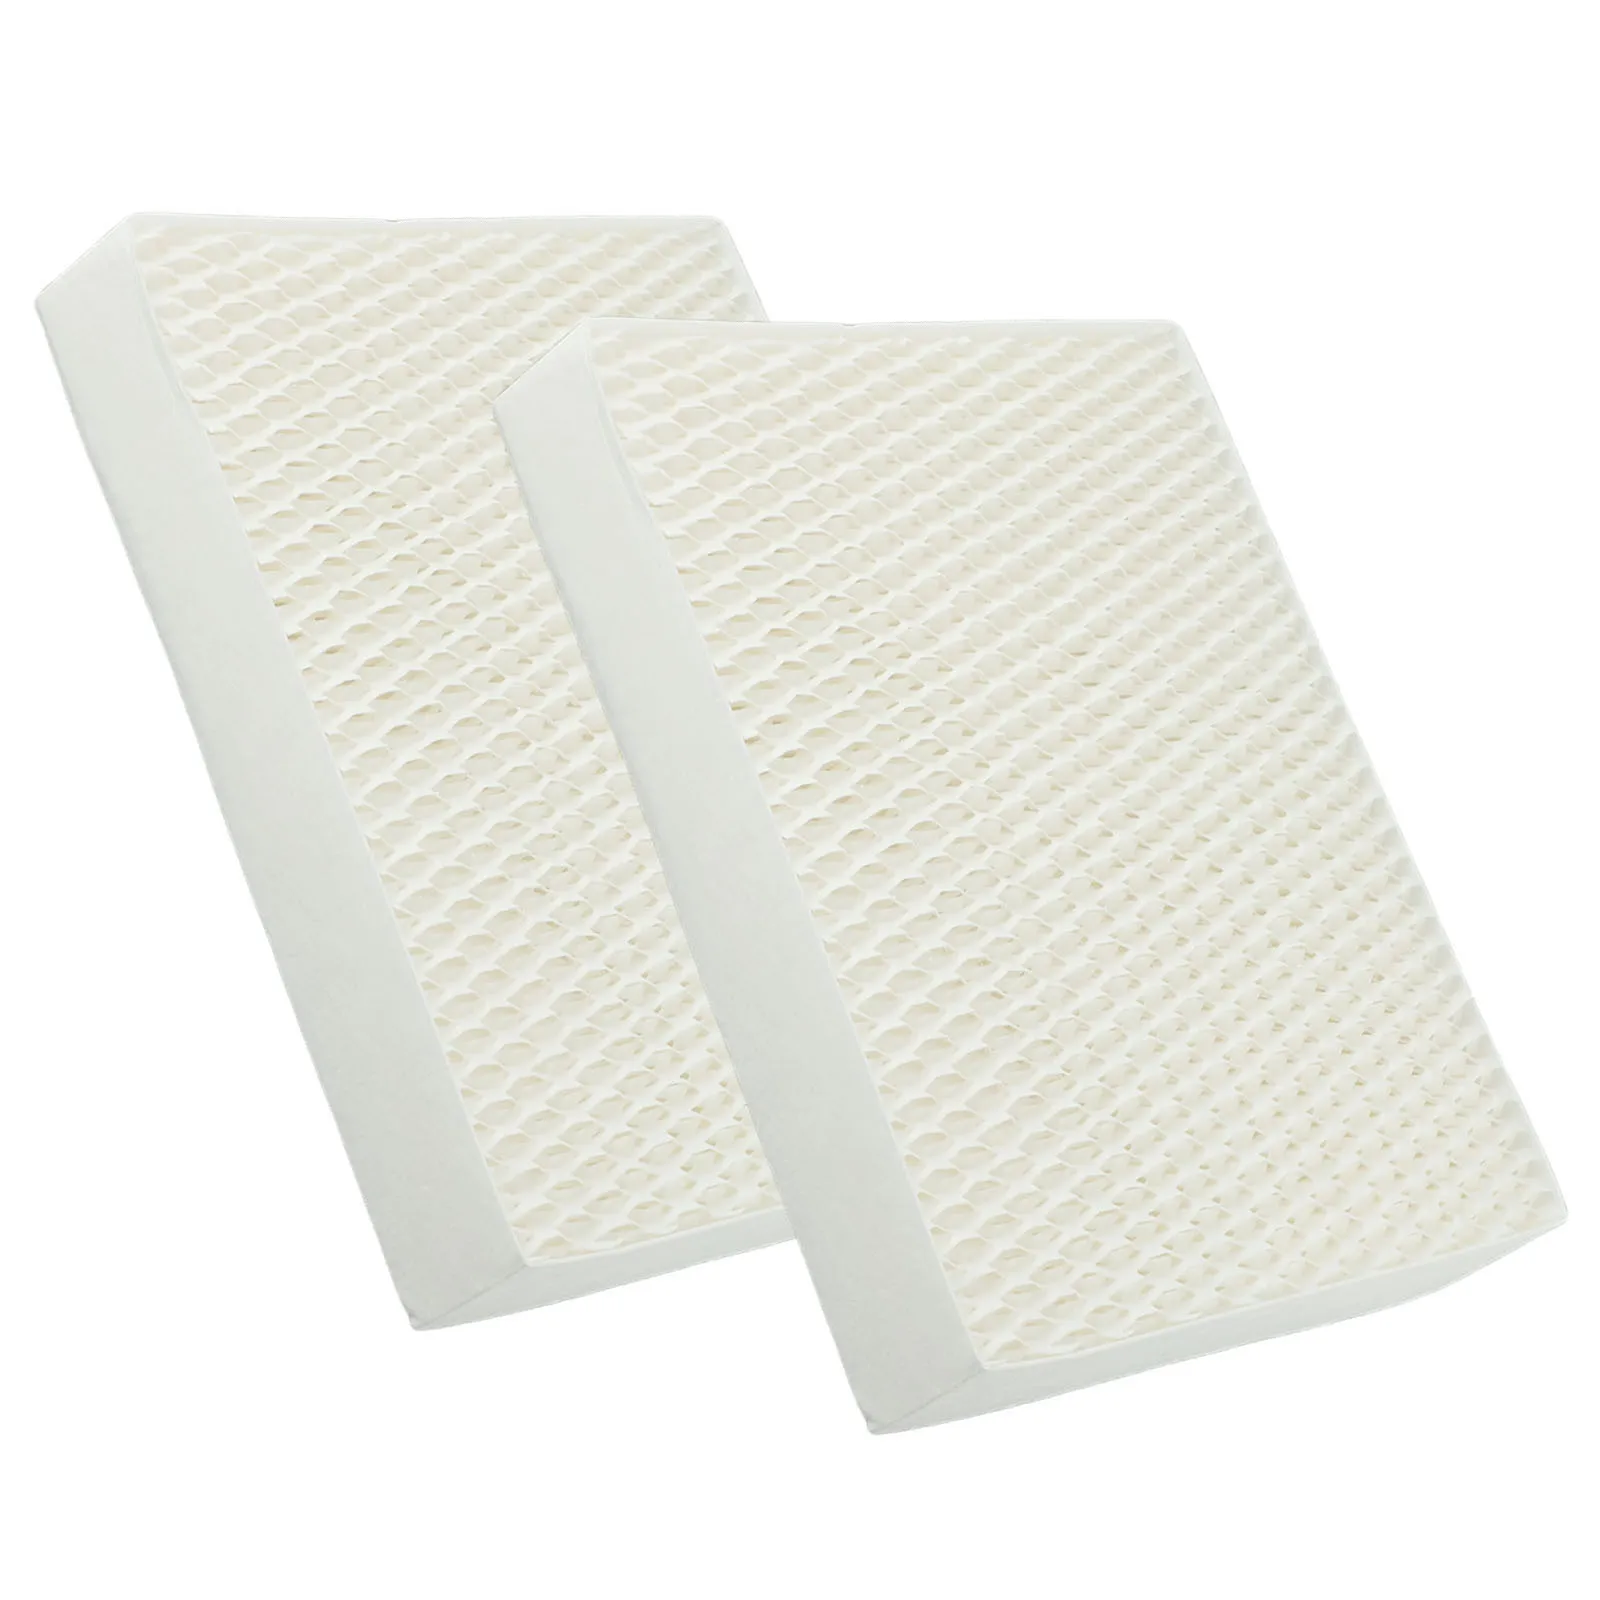 2pcs/set Replacement Filters For OSKAR Little O-101 O-102 O-103 O-104 Humidifier Air Conditioning Appliance Parts